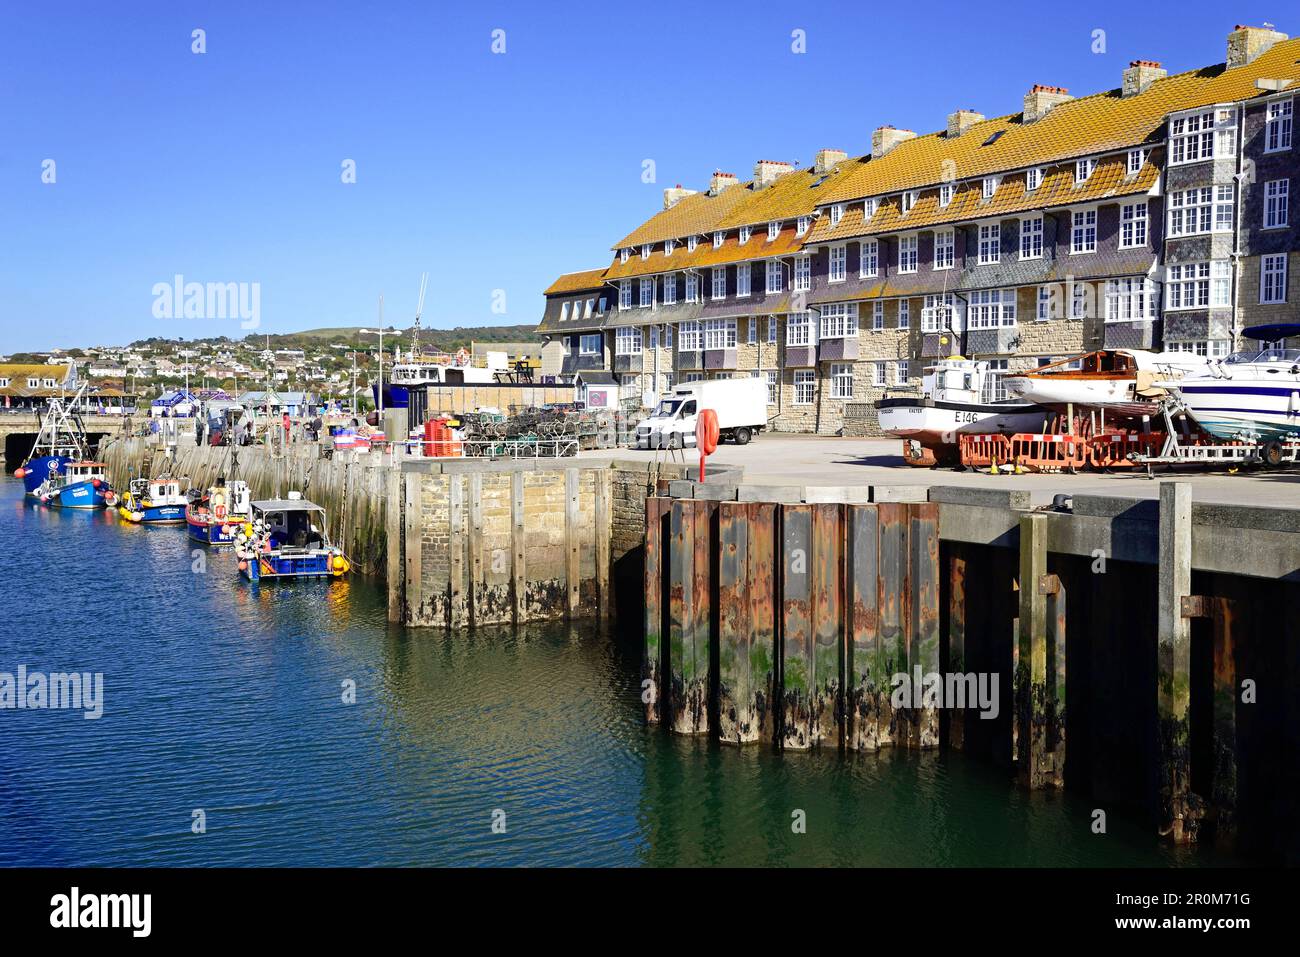 Fishing boats moored in the harbour with apartments and town buildings to the rear, West Bay, Dorset, UK, Europe. Stock Photo